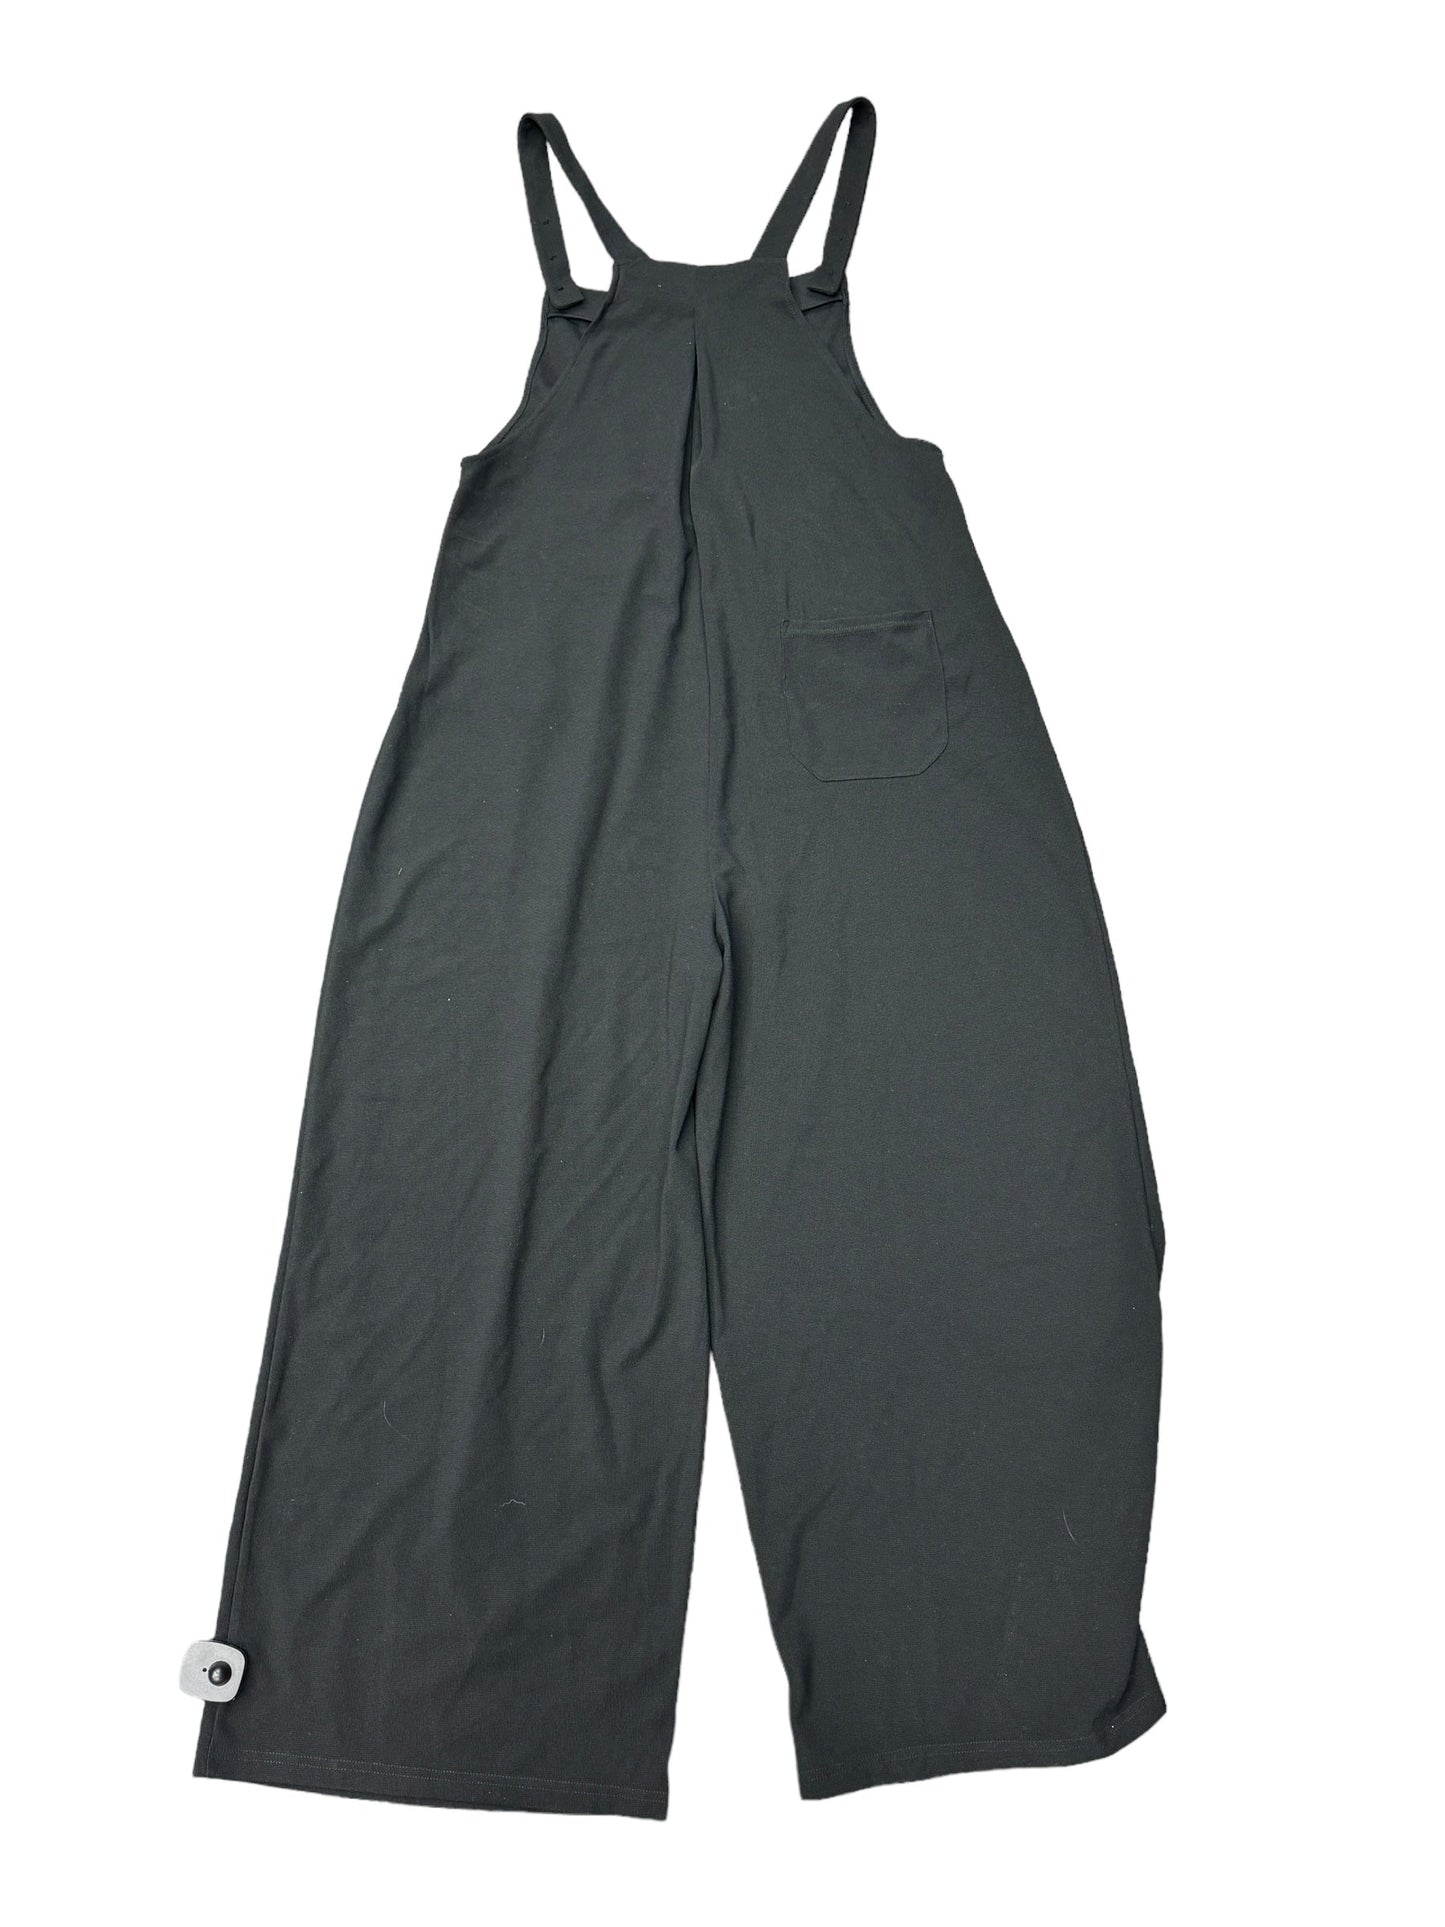 Black Overalls Clothes Mentor, Size 12